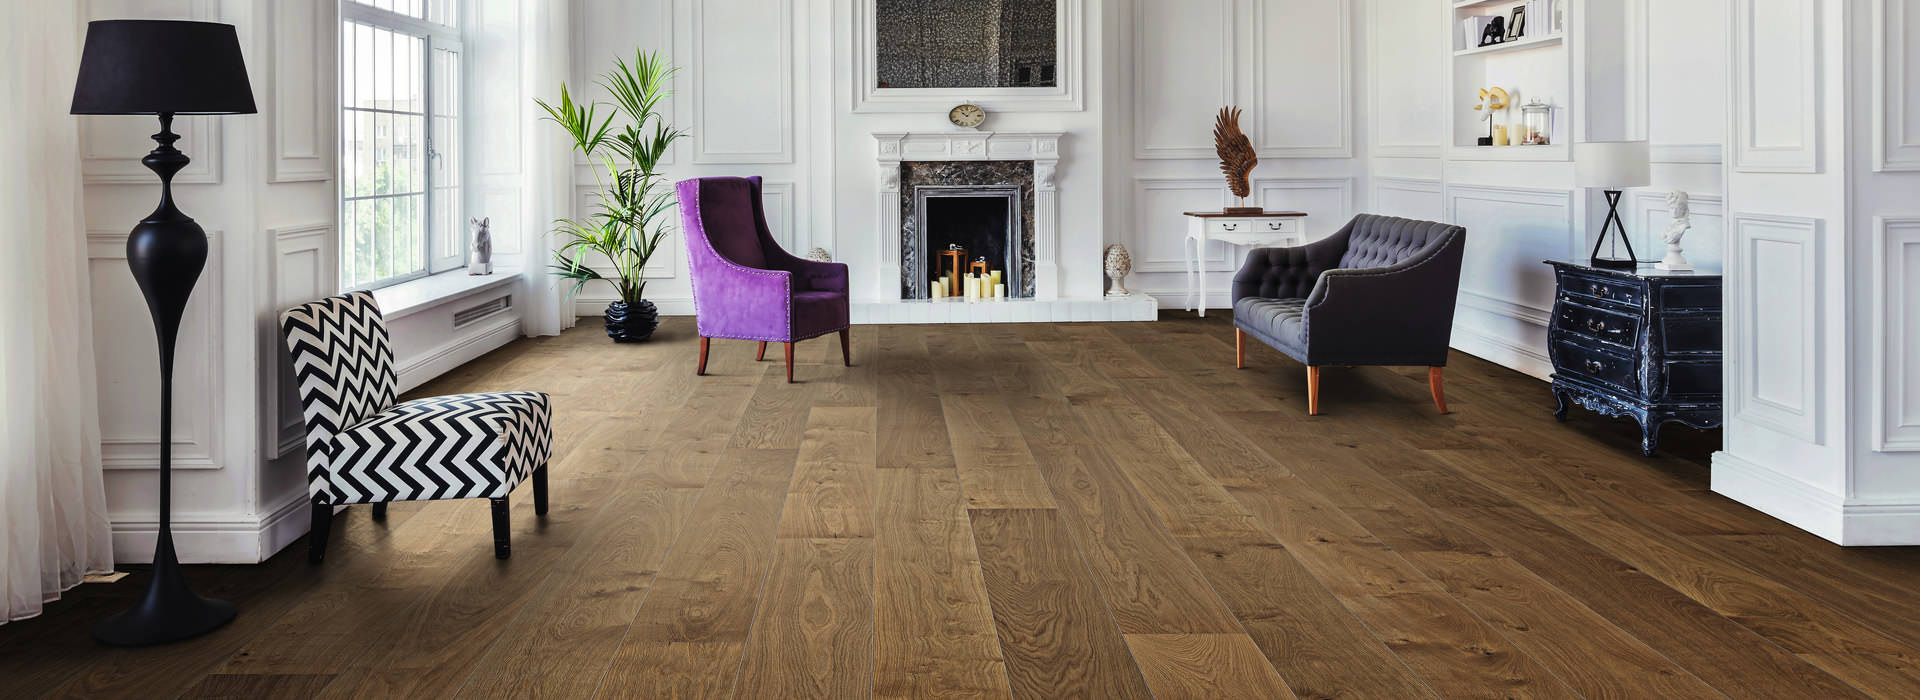 HARO PARQUET 4000 Plank 1-Strip Plaza 240 4V Smoked Oak Markant brushed naturaLin plus Top Connect